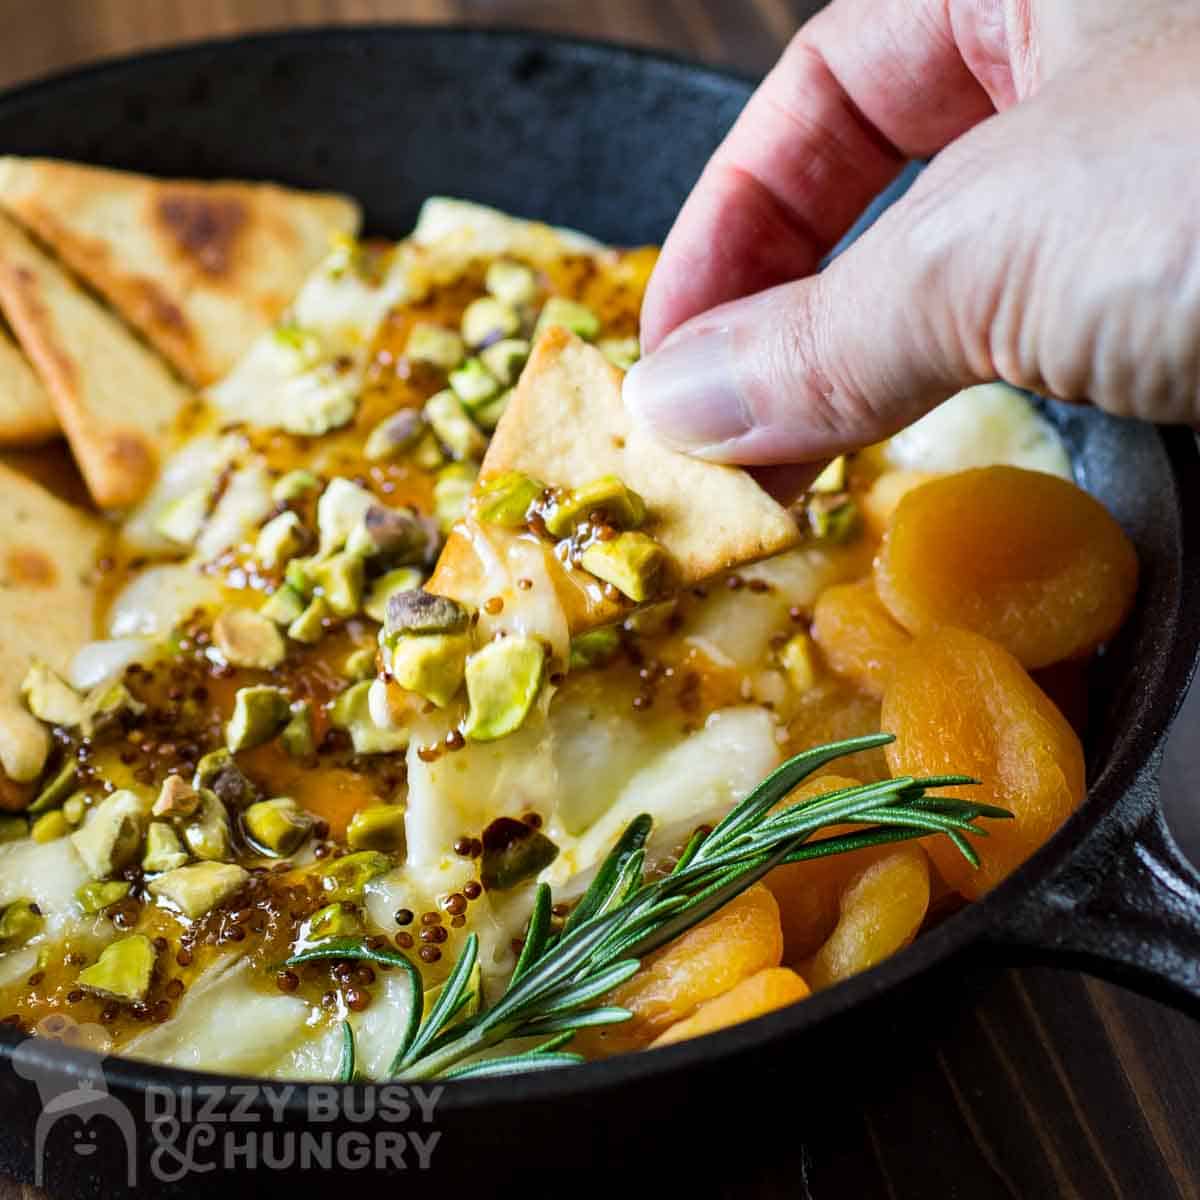 Close up shot of a pita cracker being dipped into baked brie with more crackers, apricots, and herbs on the side in a skillet on a wooden surface.